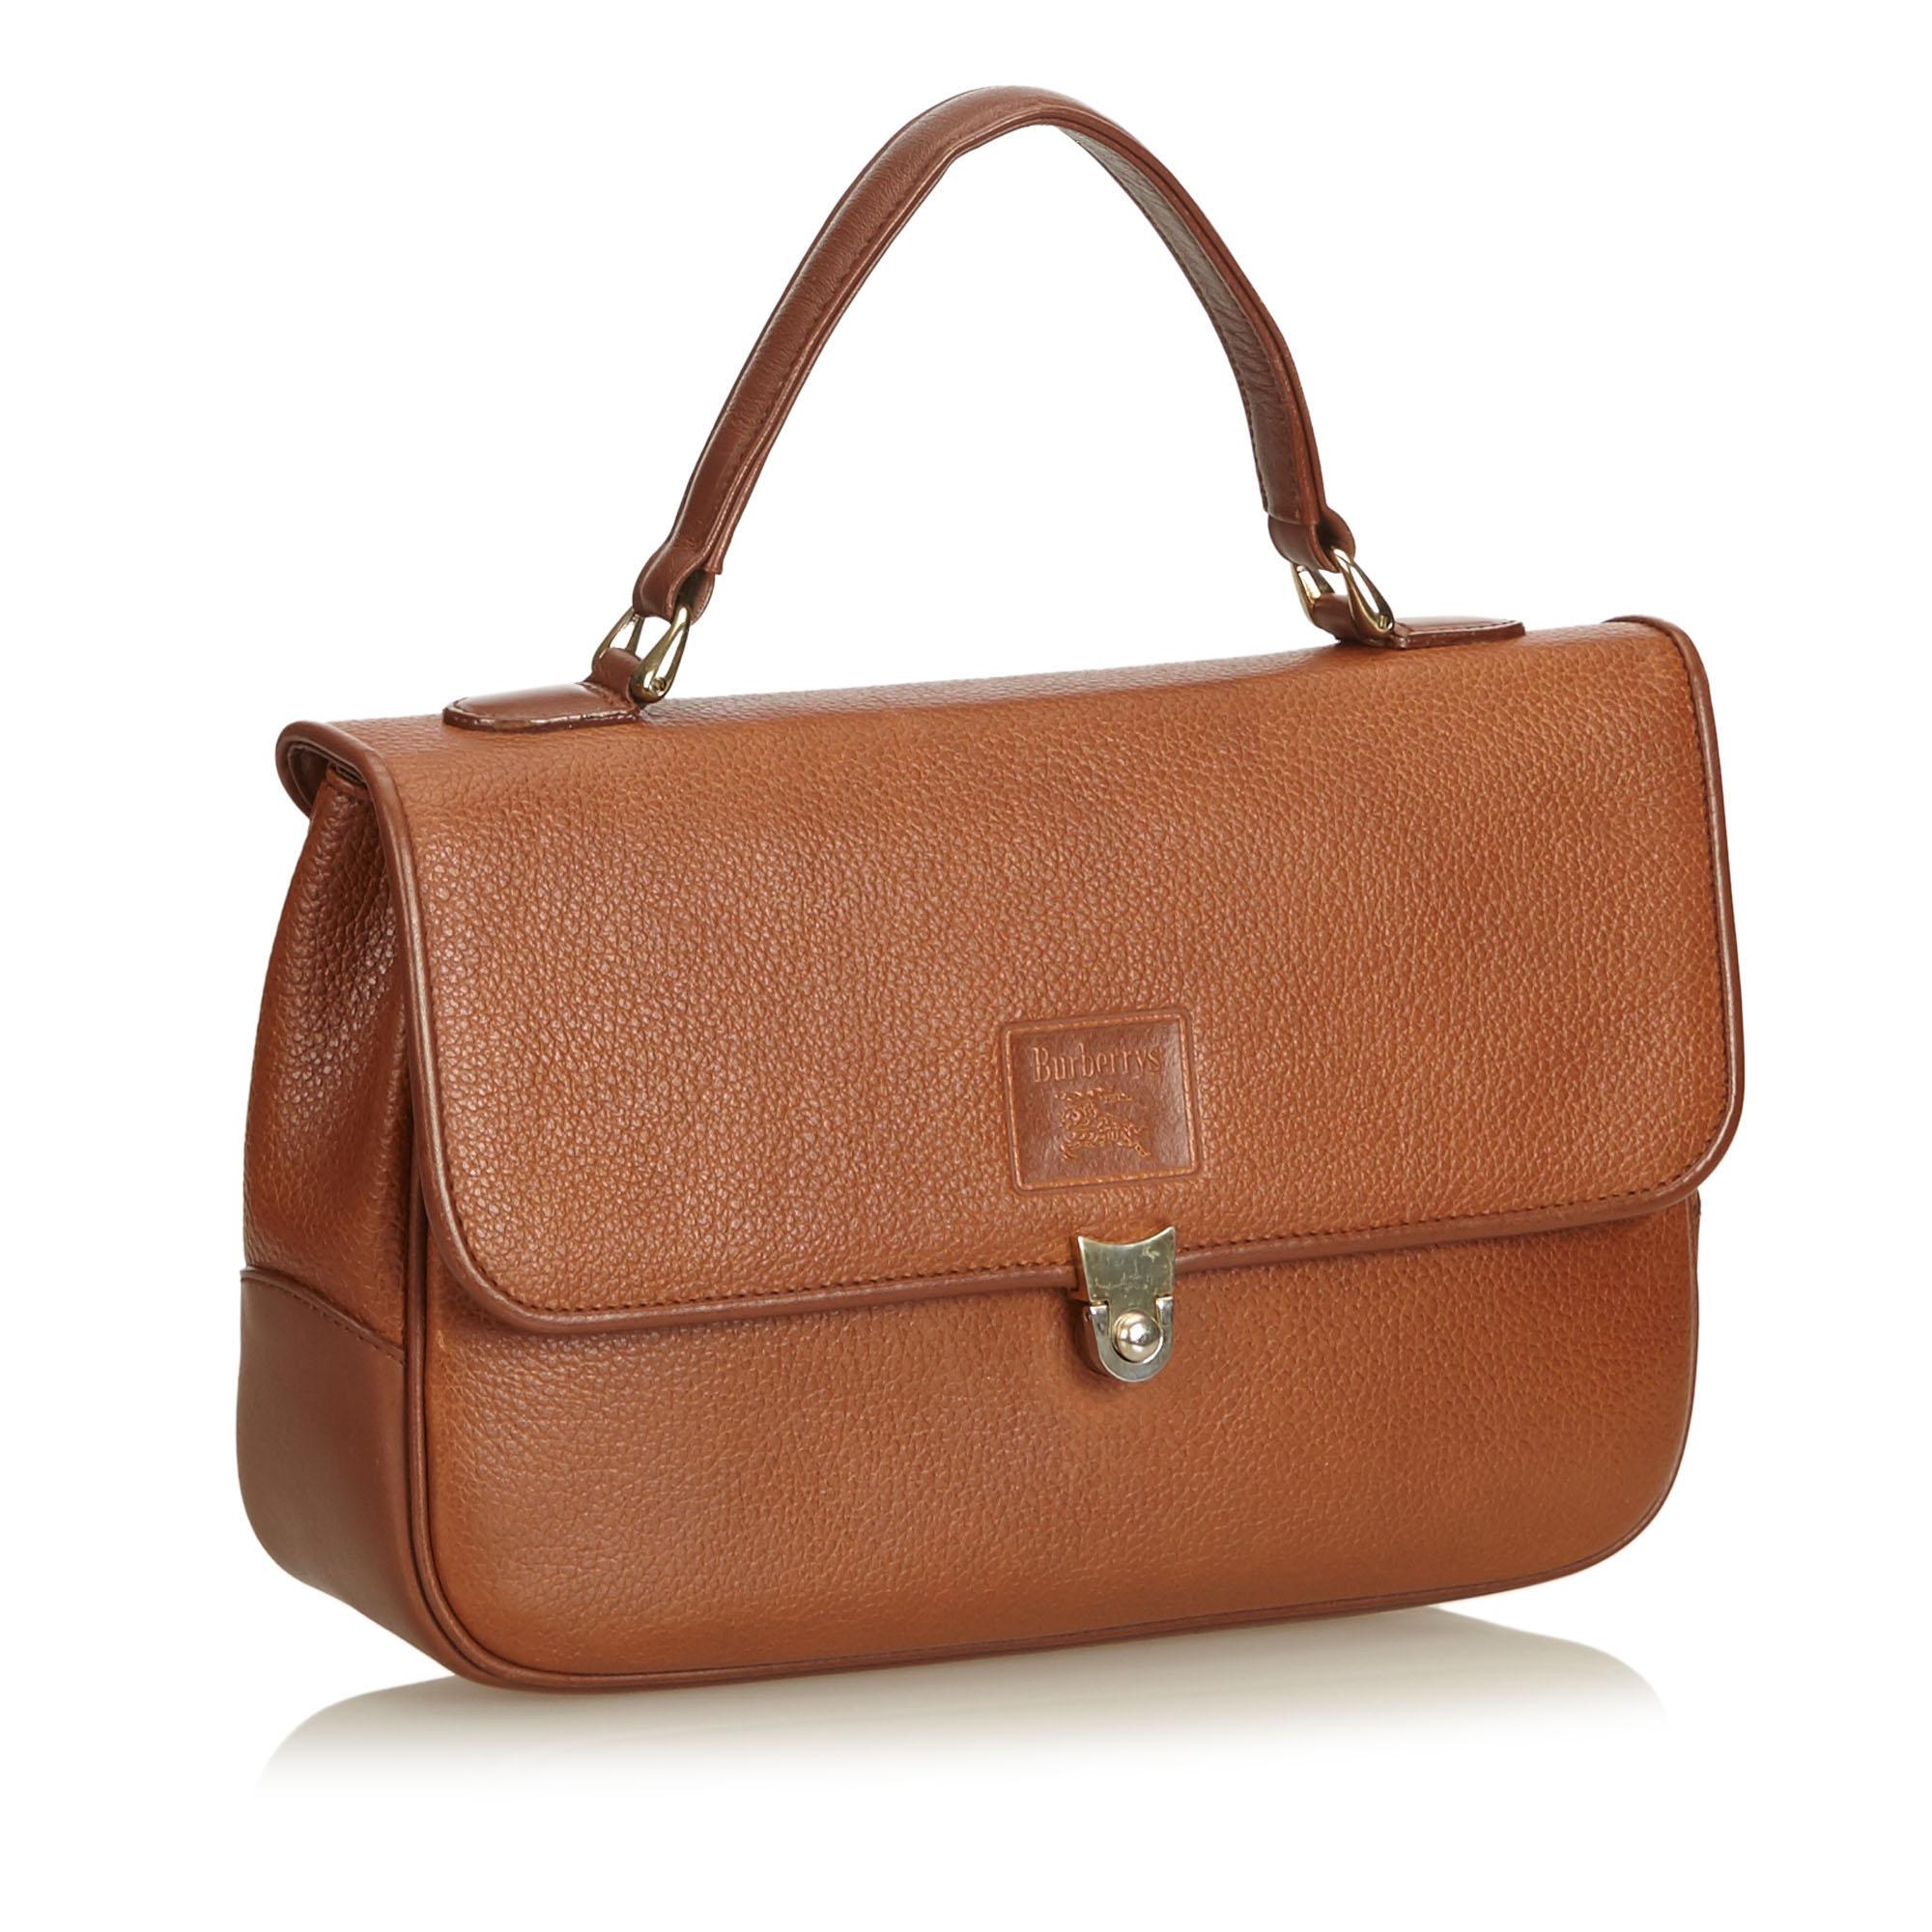 This handbag features a leather body, flat top handle, front flap with push lock closure, exterior zip pocket, and interior zip and slip pockets. It carries as B+ condition rating.

Inclusions: 
This item does not come with